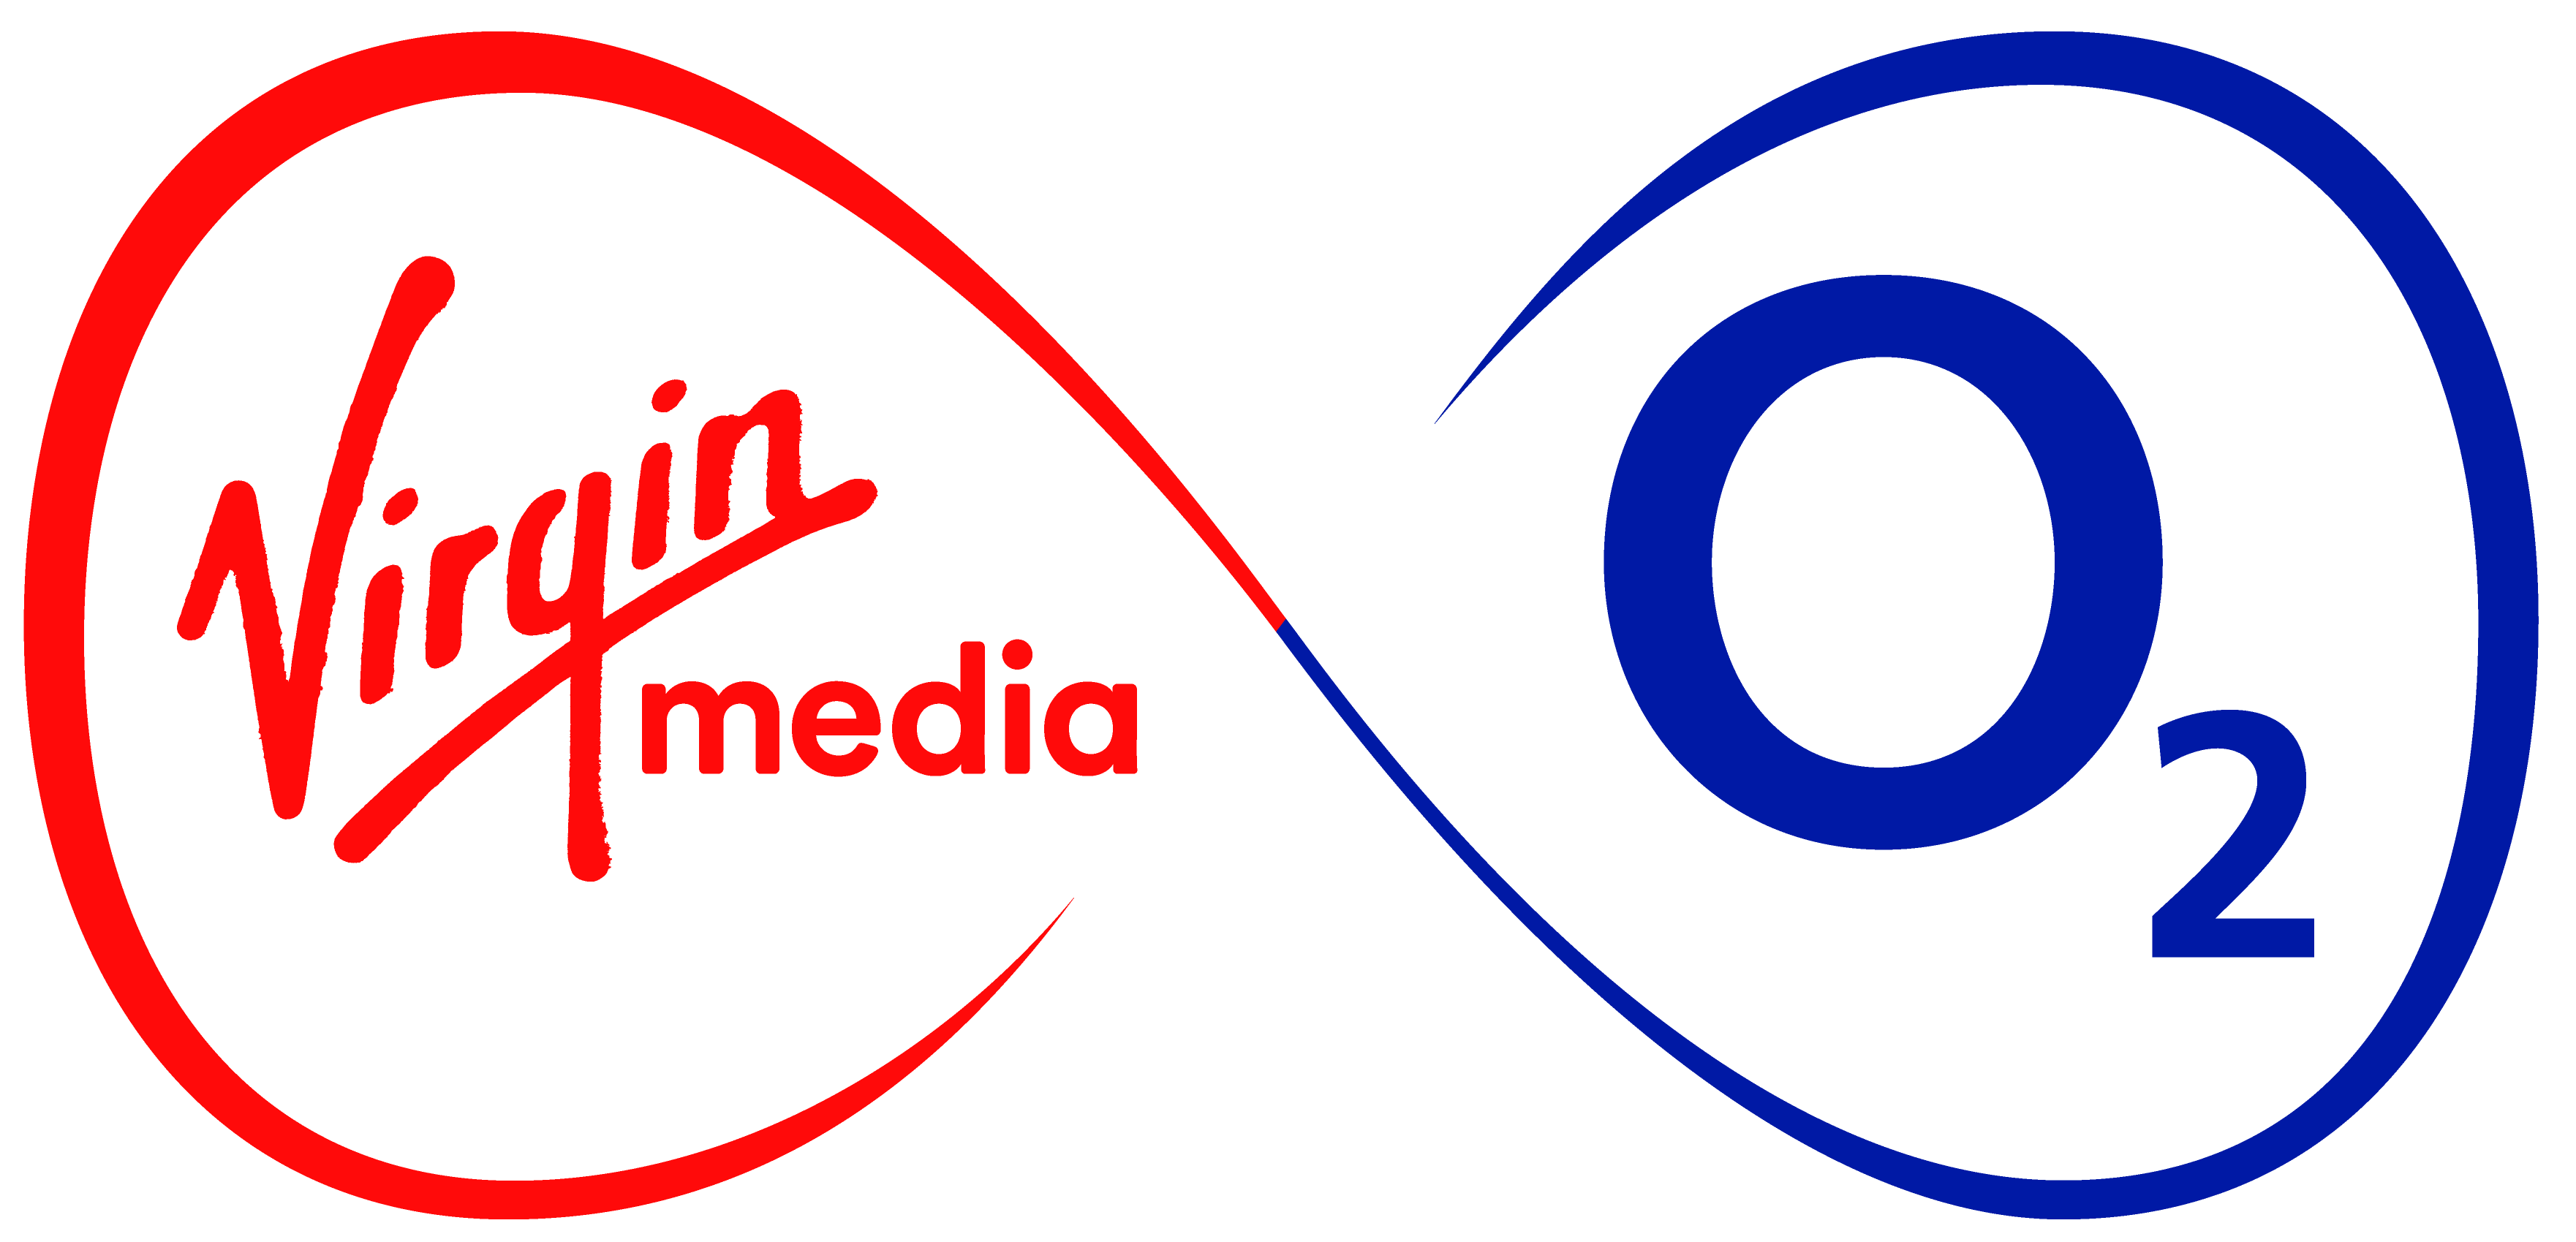 Virgin Media Big Bundle with O2 SIM offers 362 Mbps download speeds and 36 Mbps upload speeds. Customers get over 145 TV channels and a £75 bill credit.